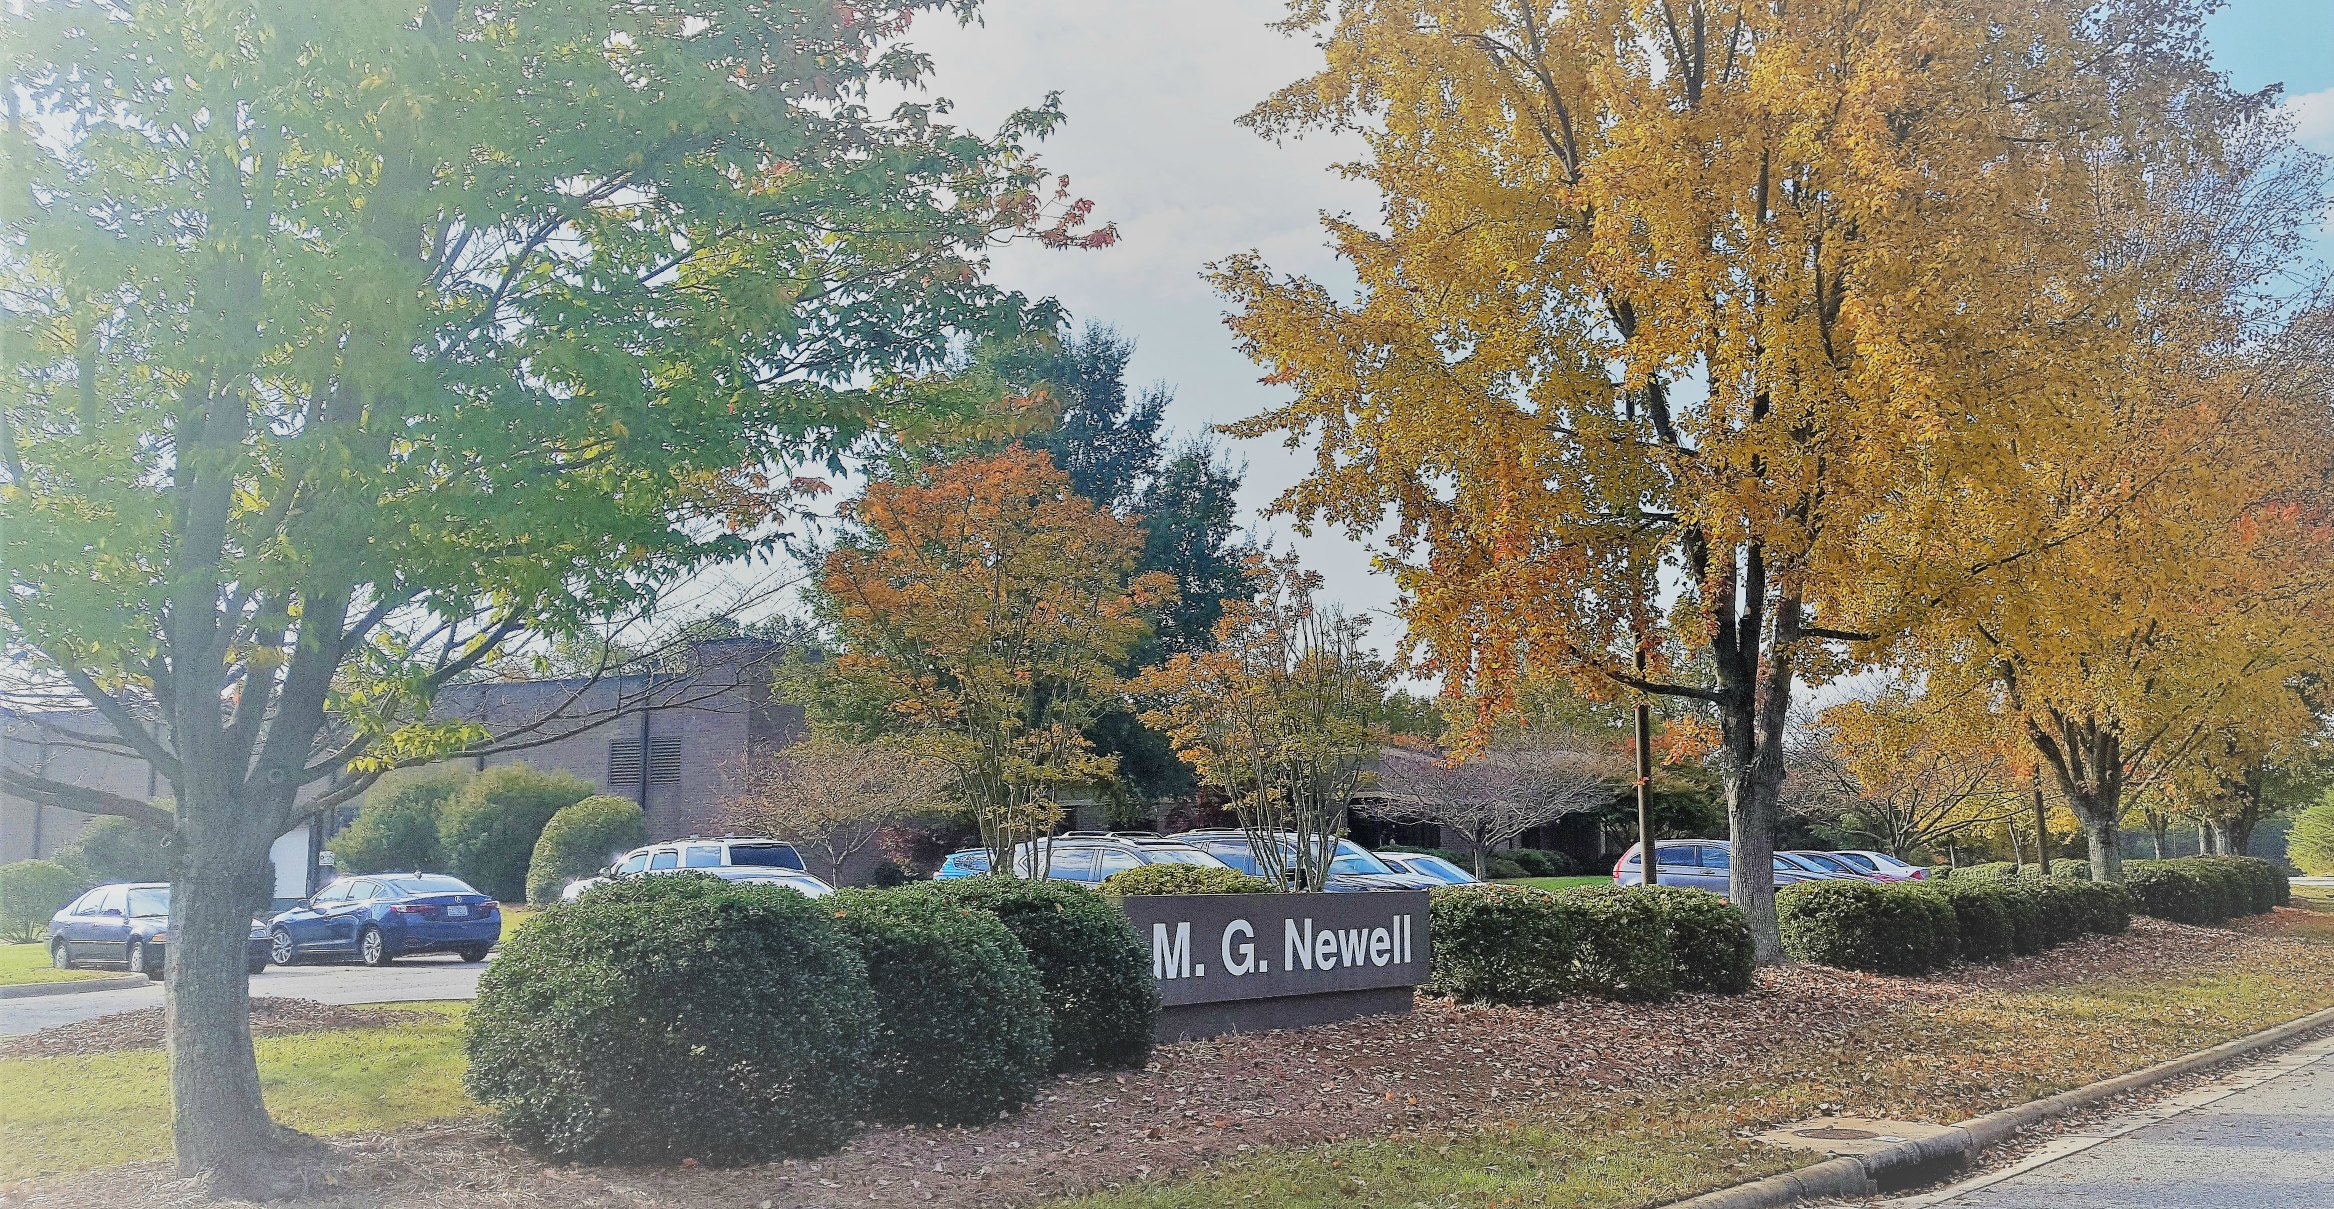 M.G. Newell building